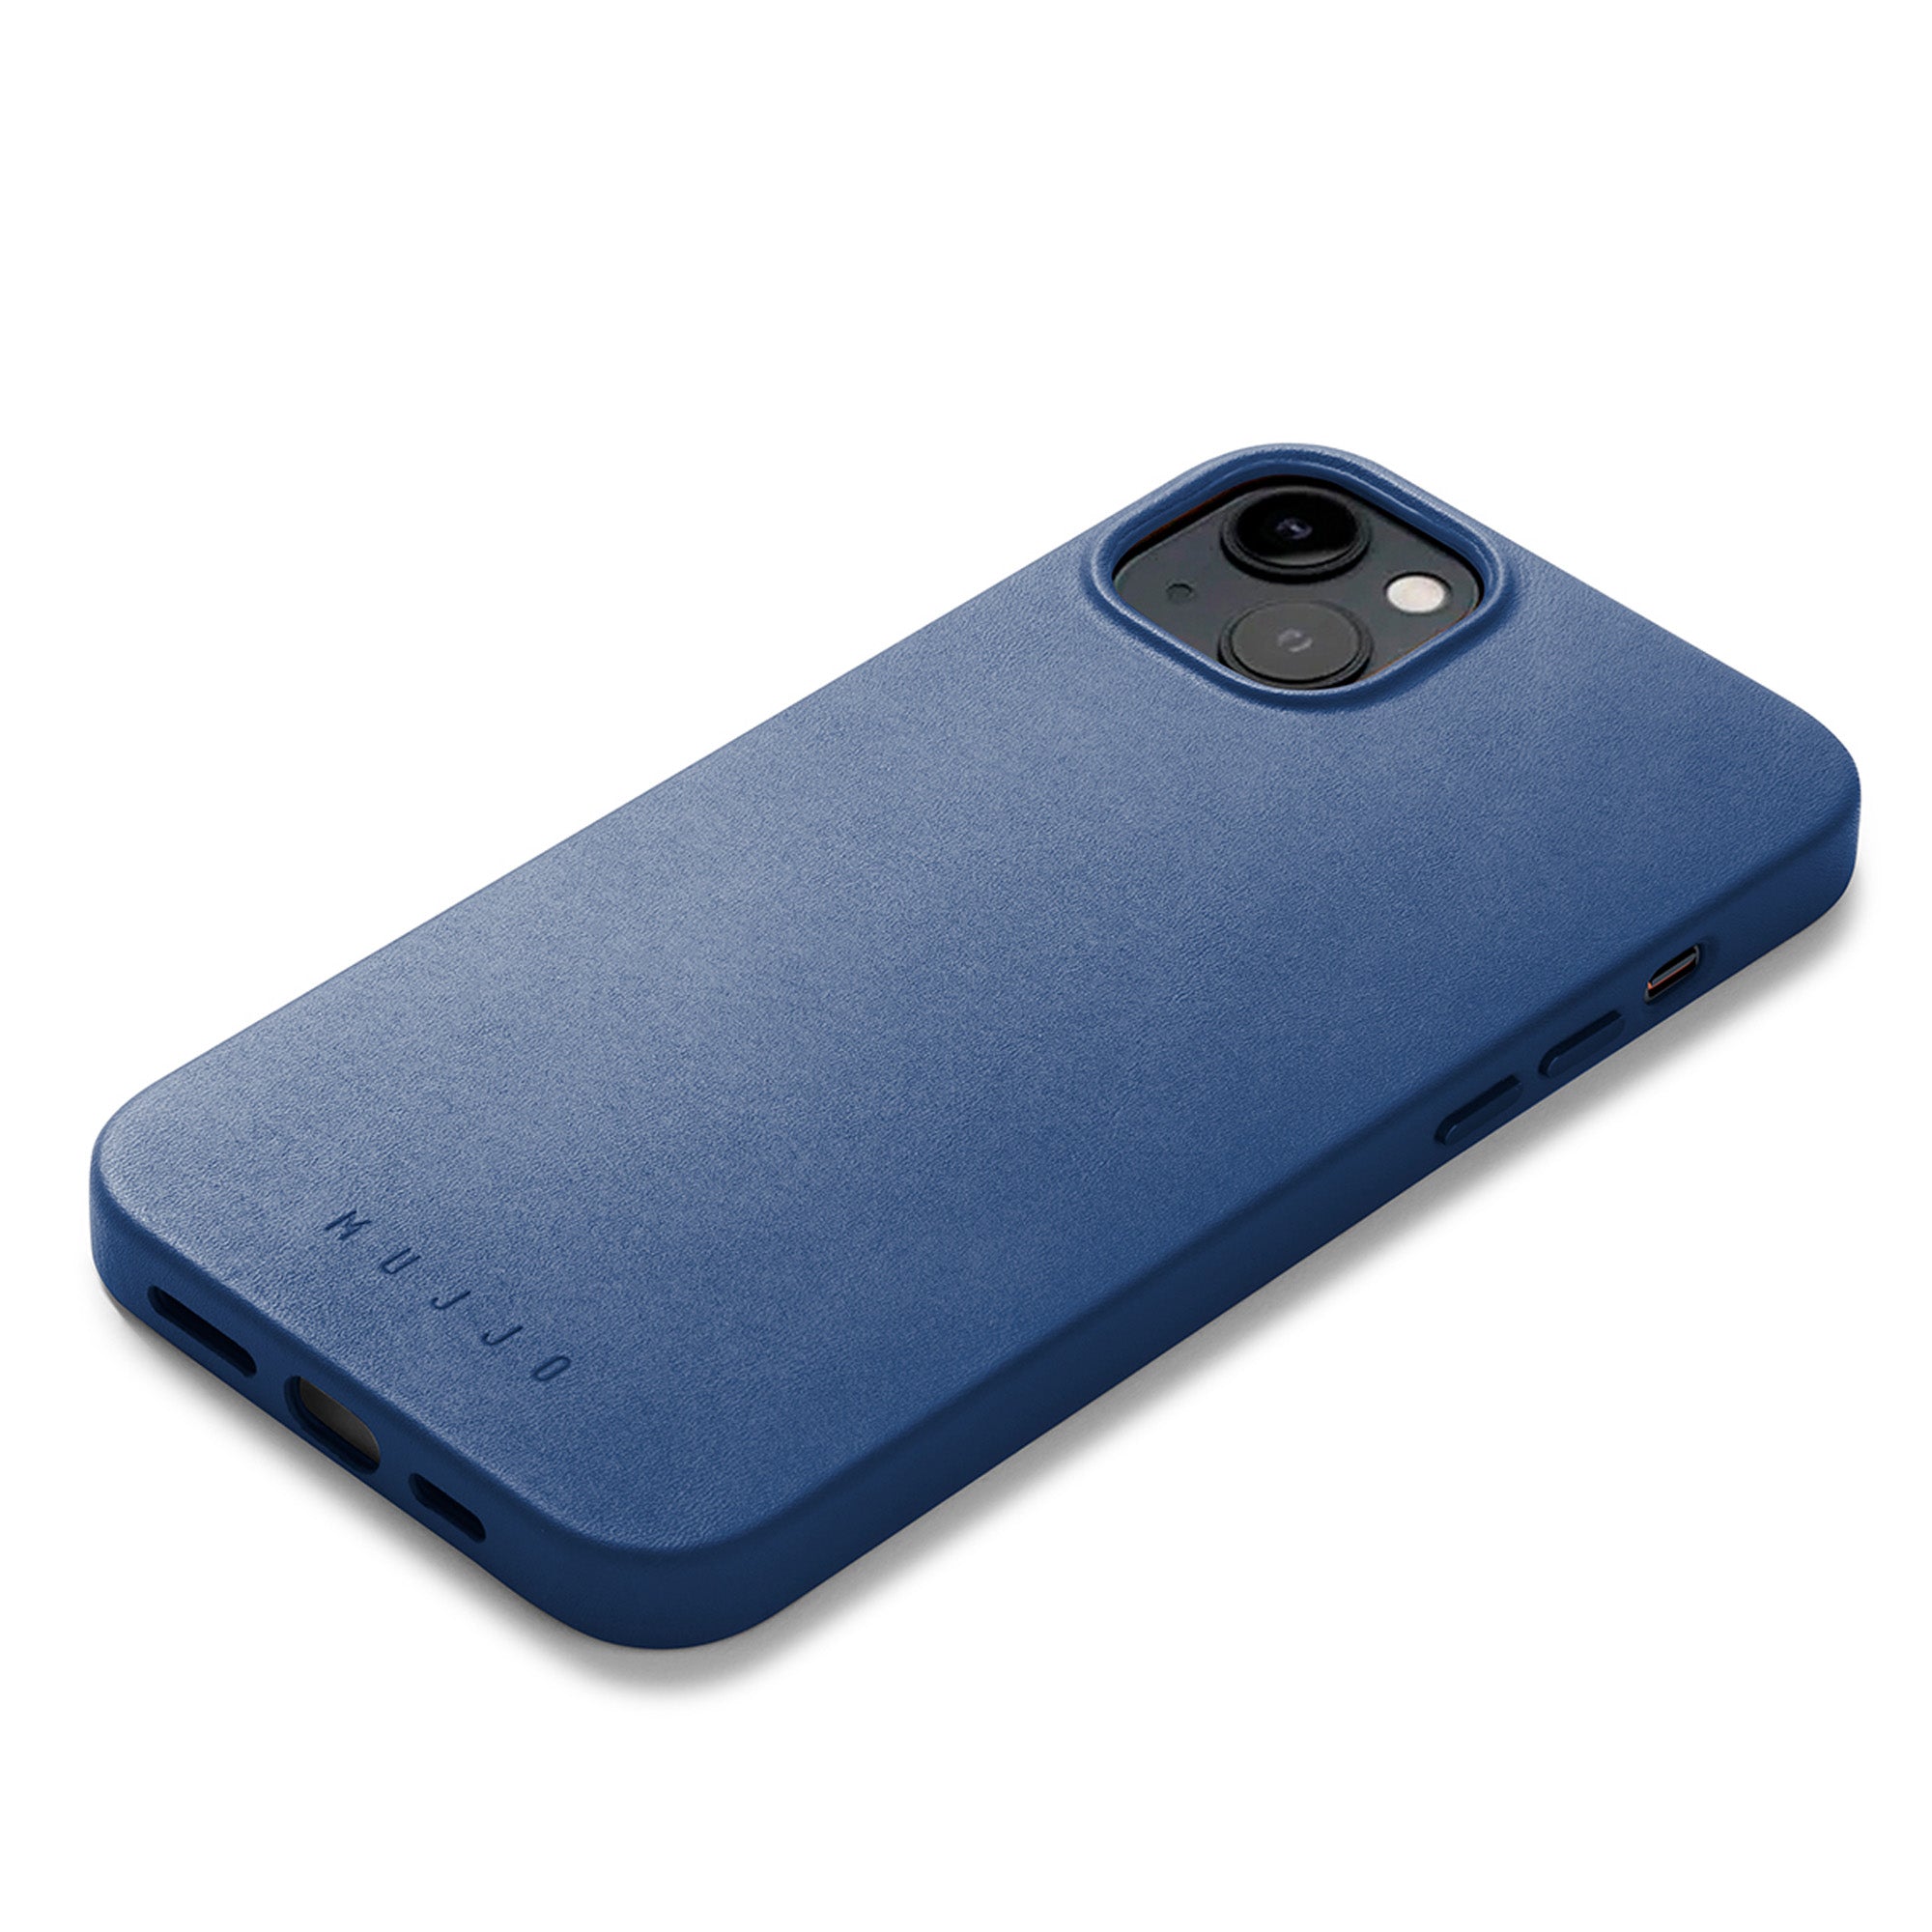 mujjo full leather case iphone 11